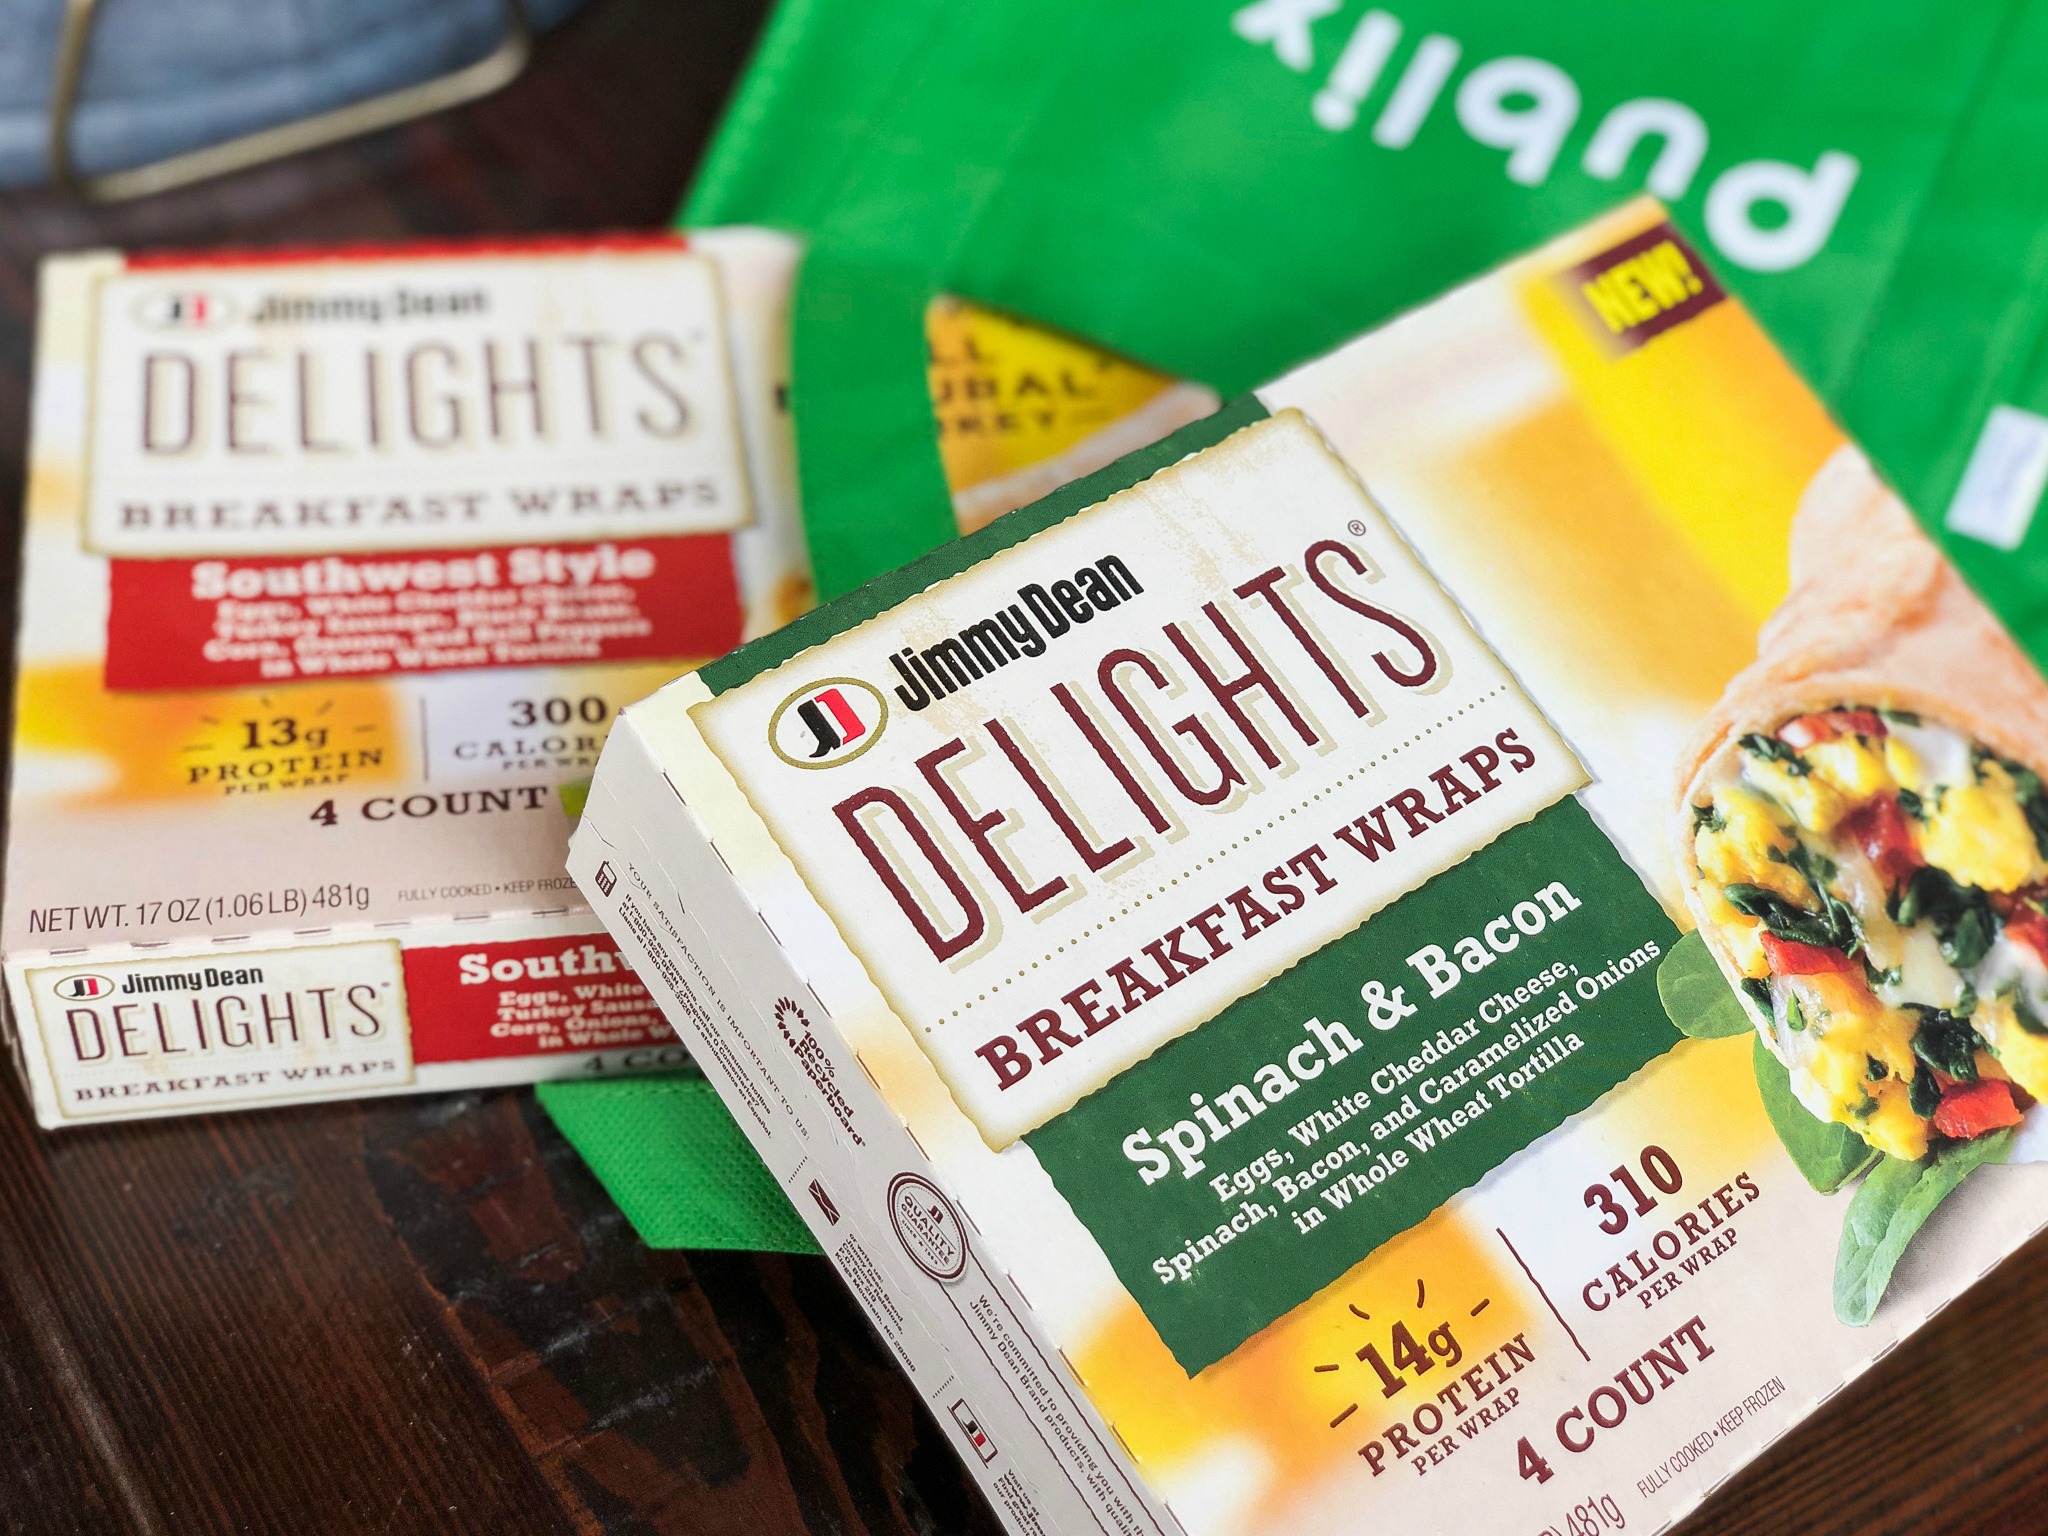 Try New Jimmy Dean Delights® Breakfast Wraps - Clip Your Coupon & Save! on I Heart Publix 1